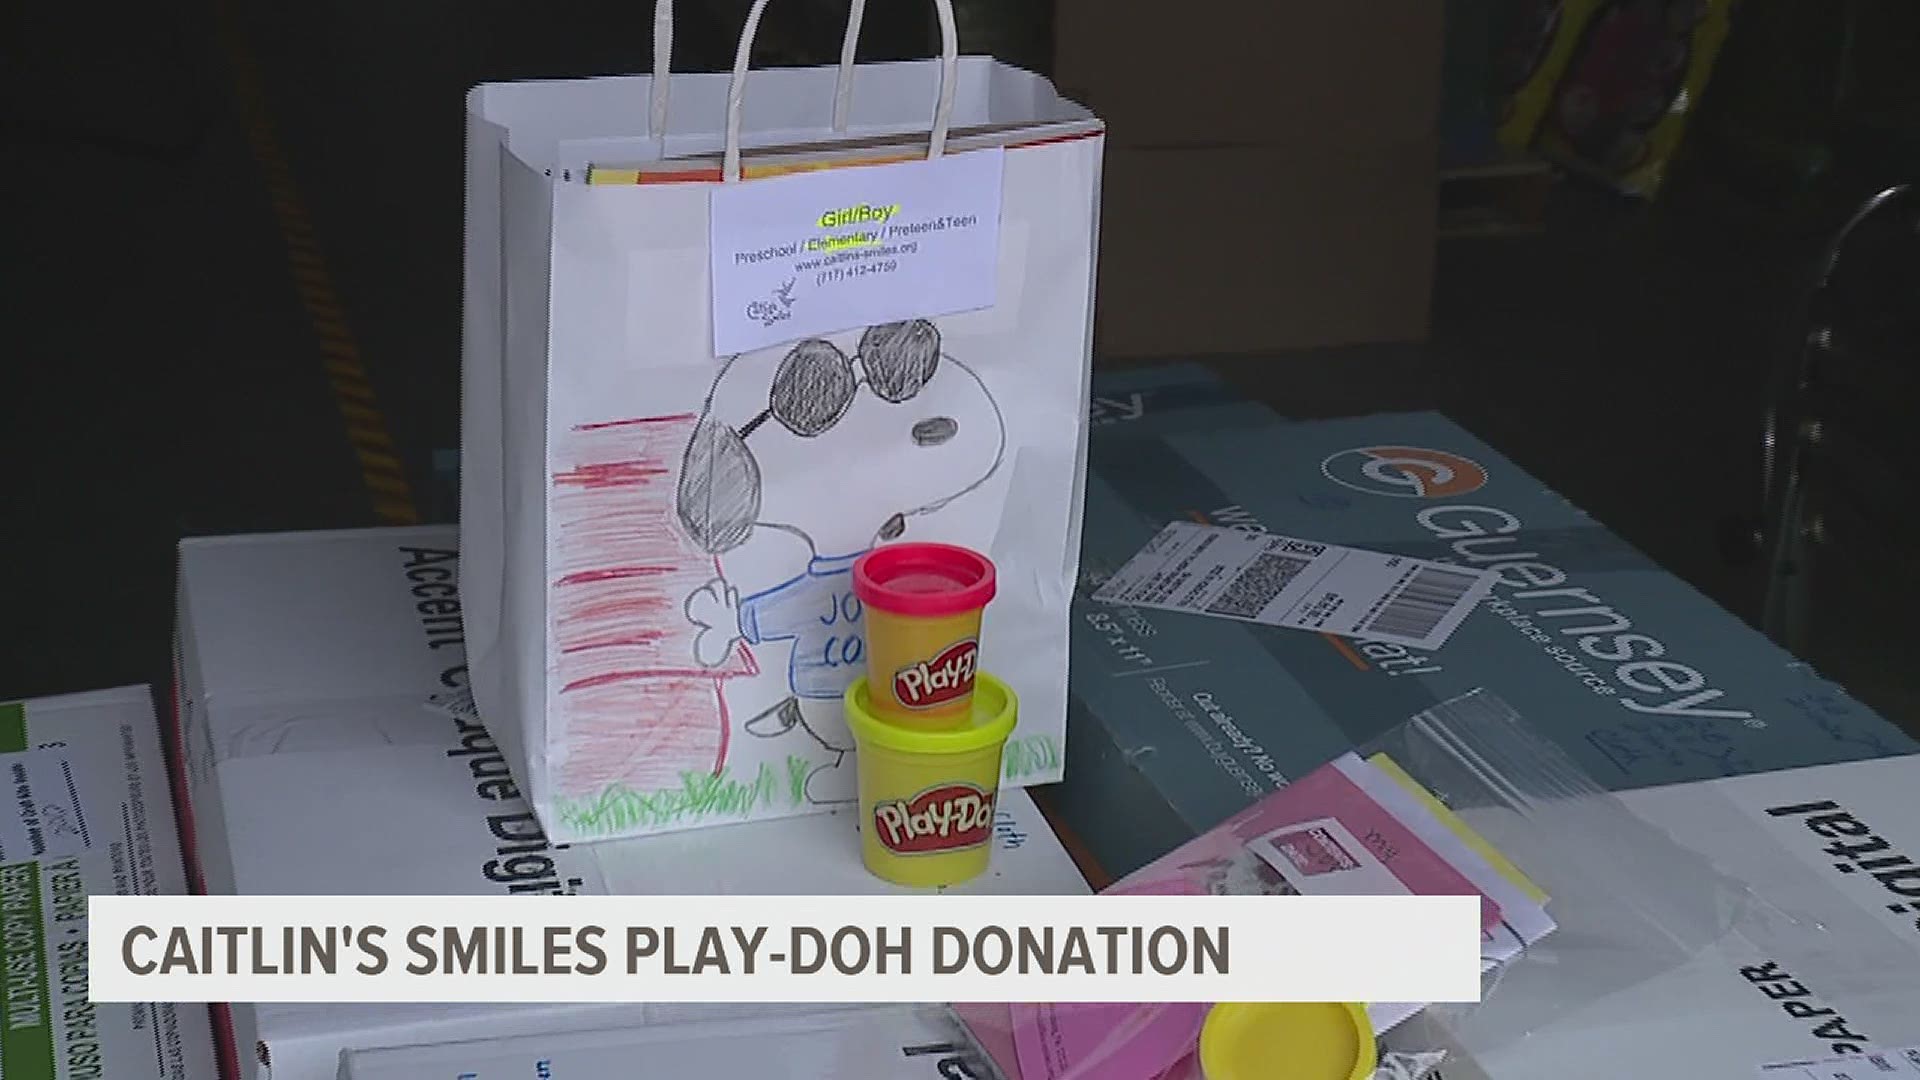 More than 9,100 cans of Play Doh donated to local organization to help bring smiles to children's faces